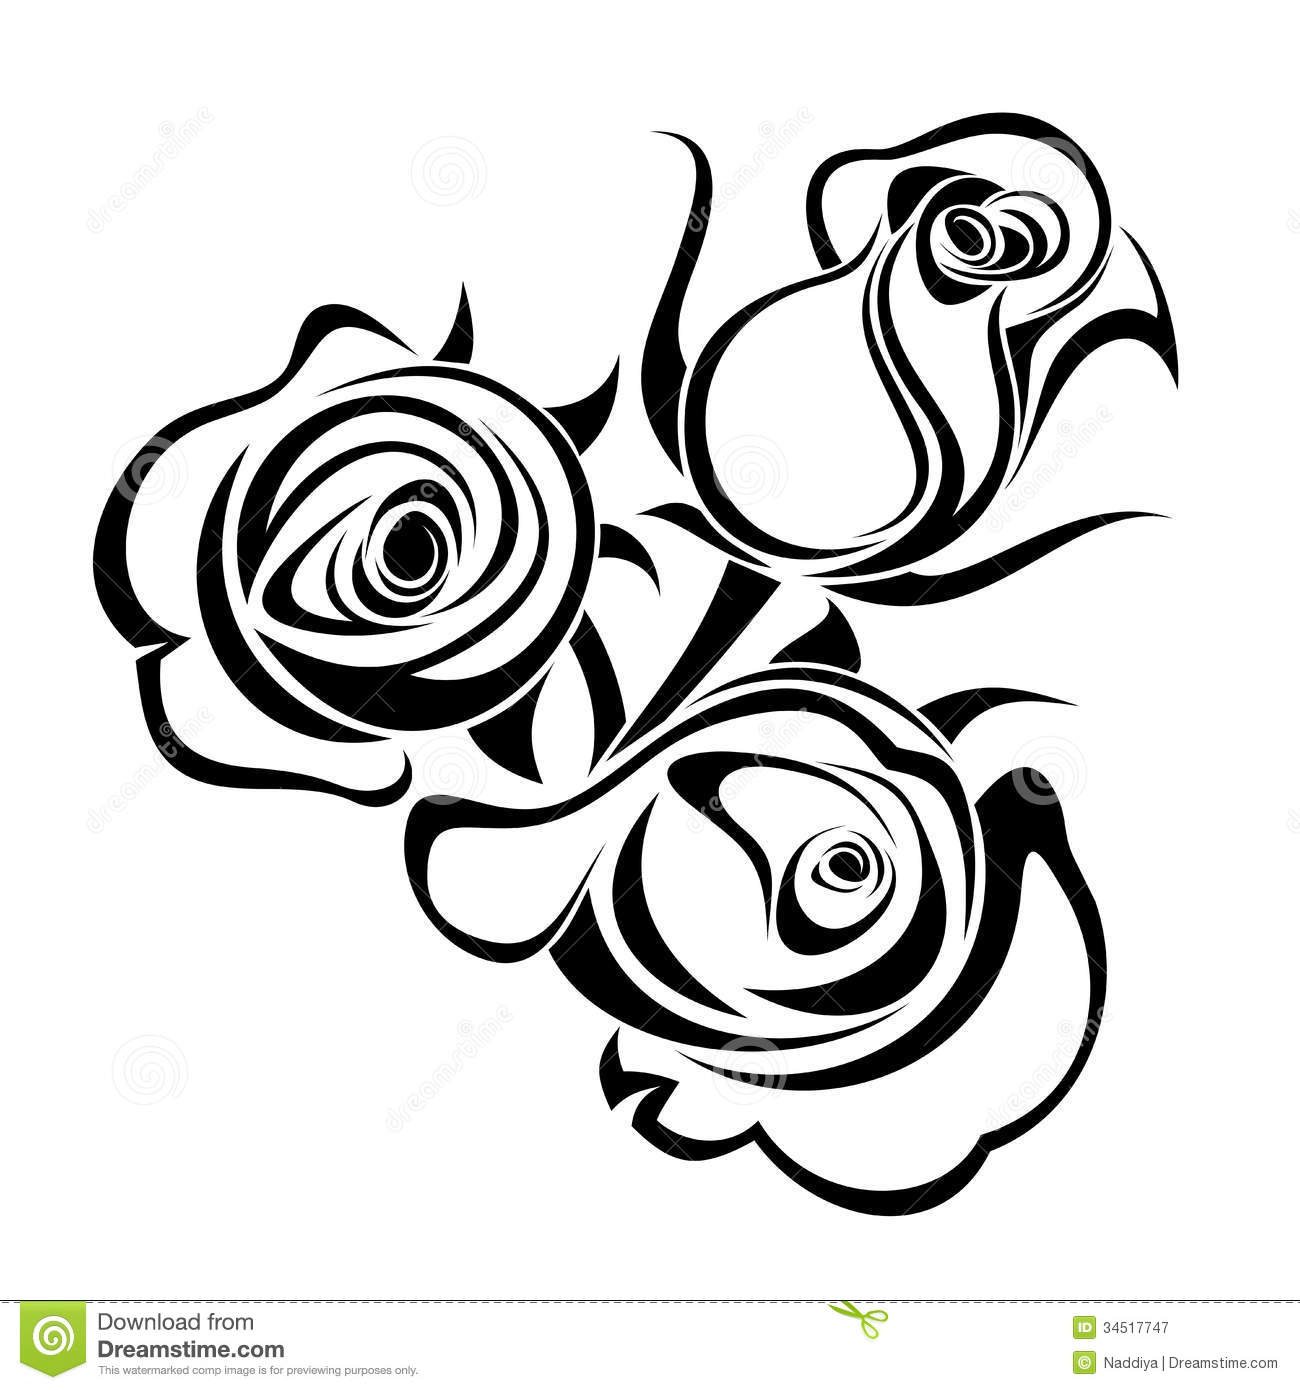 Rose Bouquet Clip Art Black And White Rose Buds Black Silhouettes